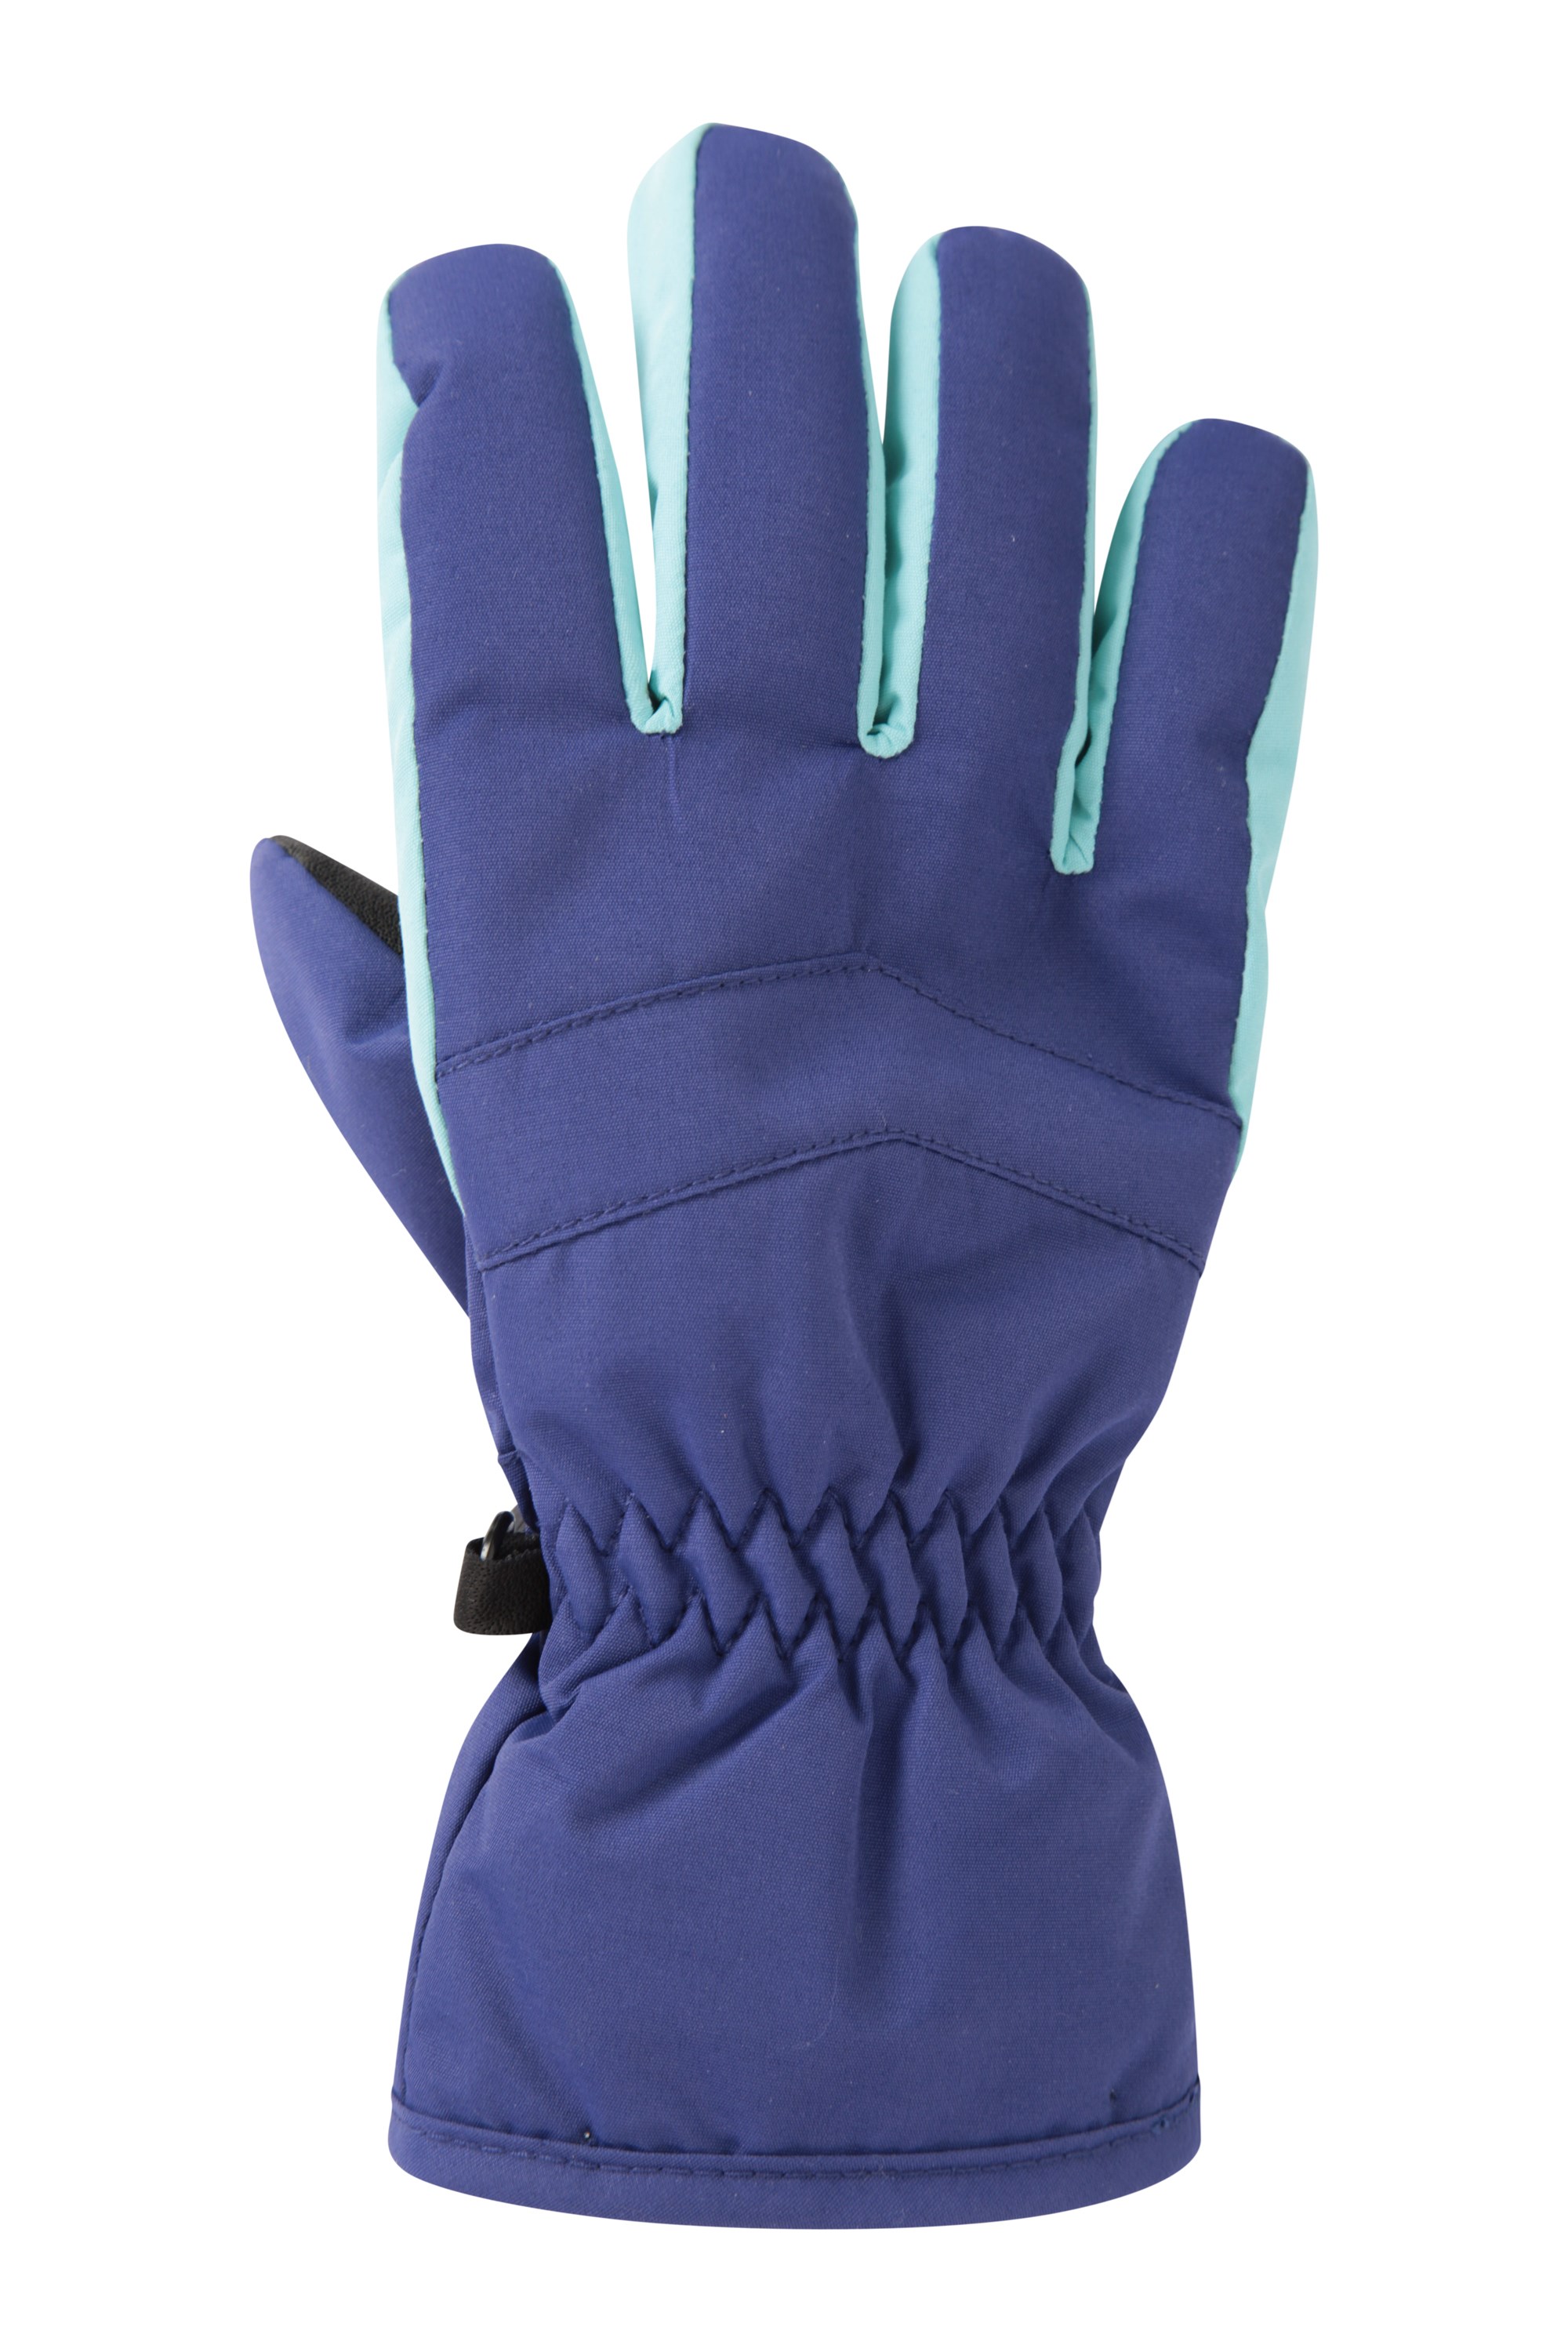 Youth Core Glove w/ Breathability & Waterproof Construction 